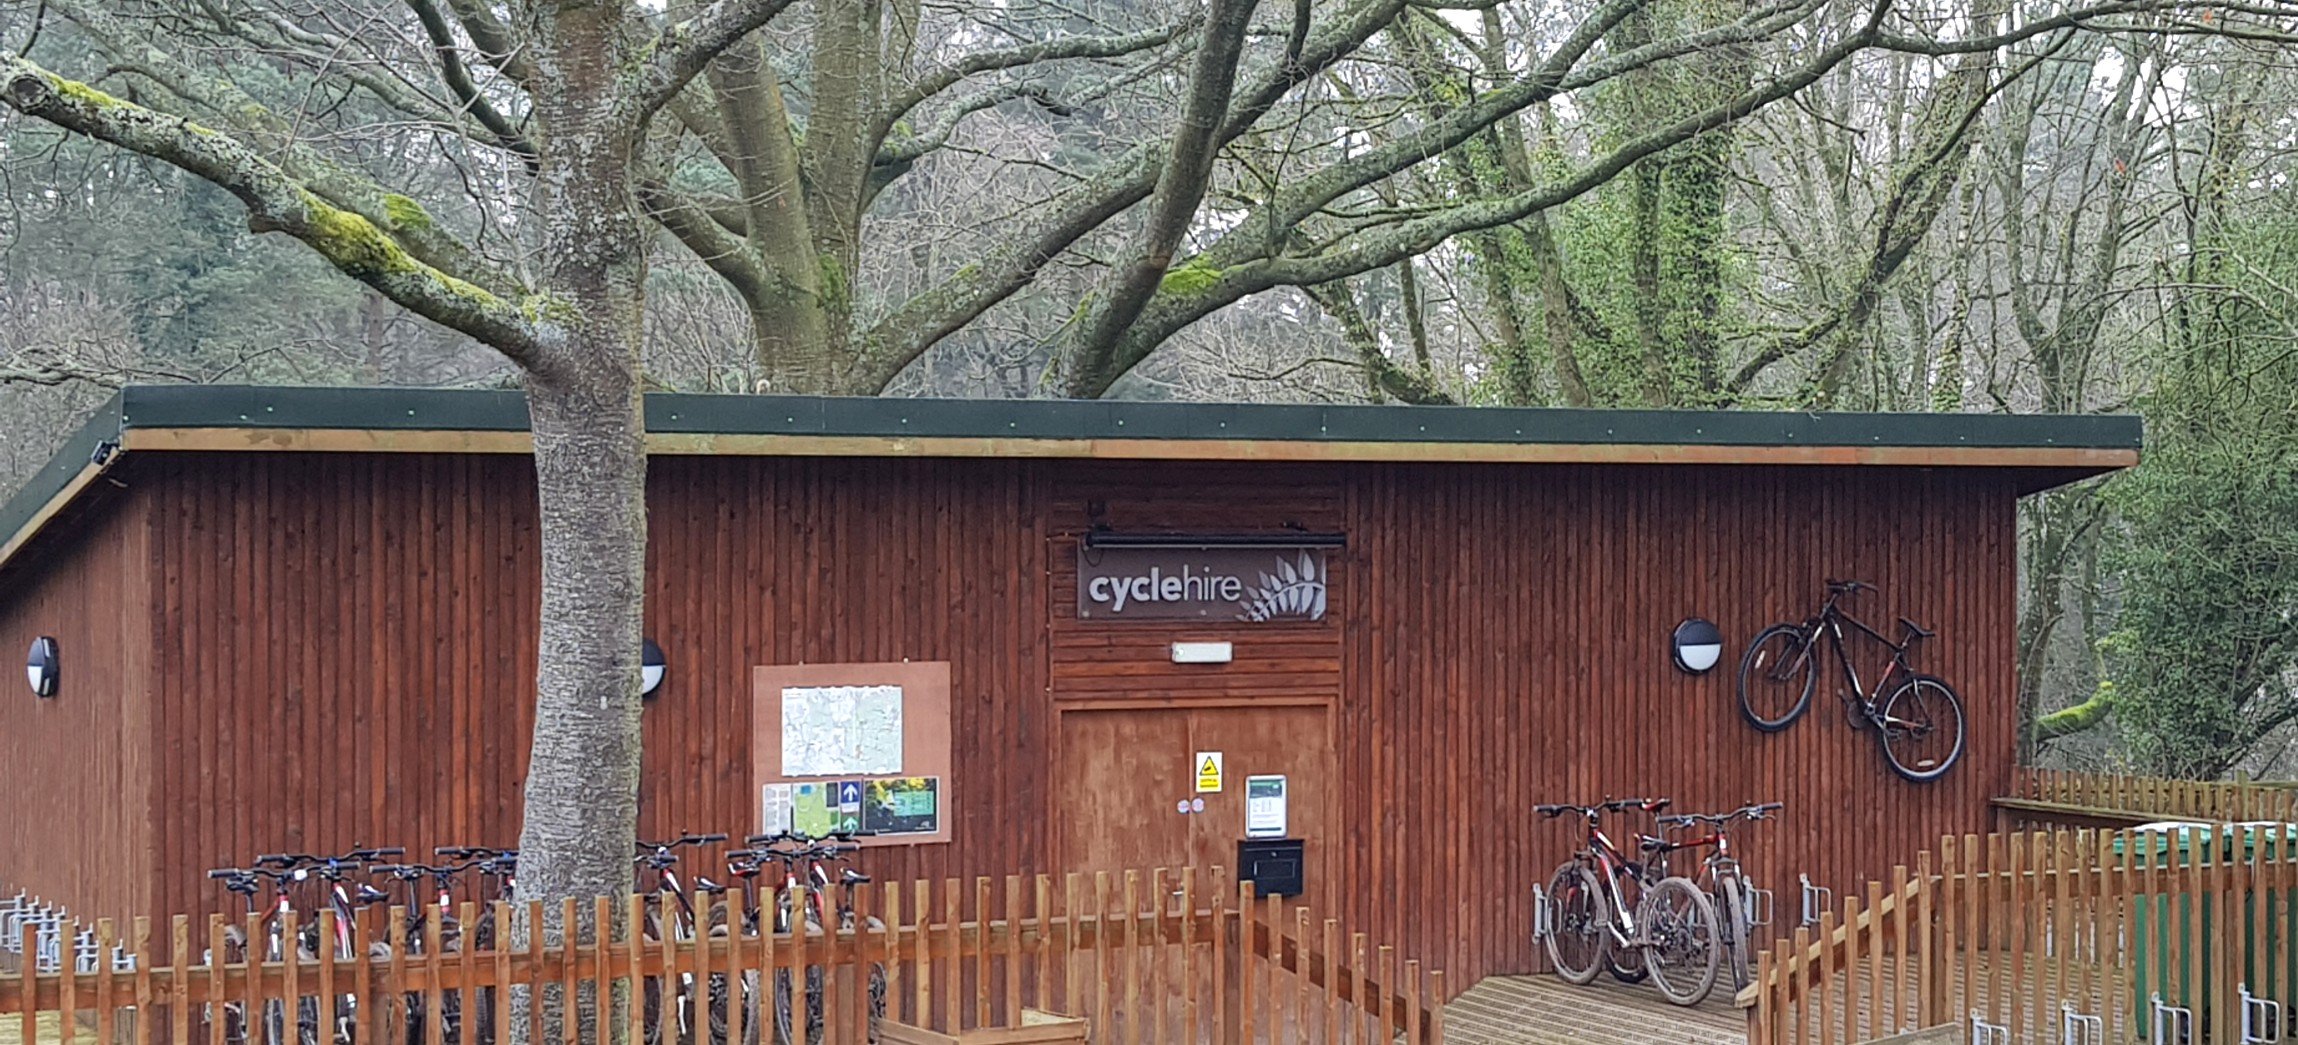 Cycle Hire building from the outside.